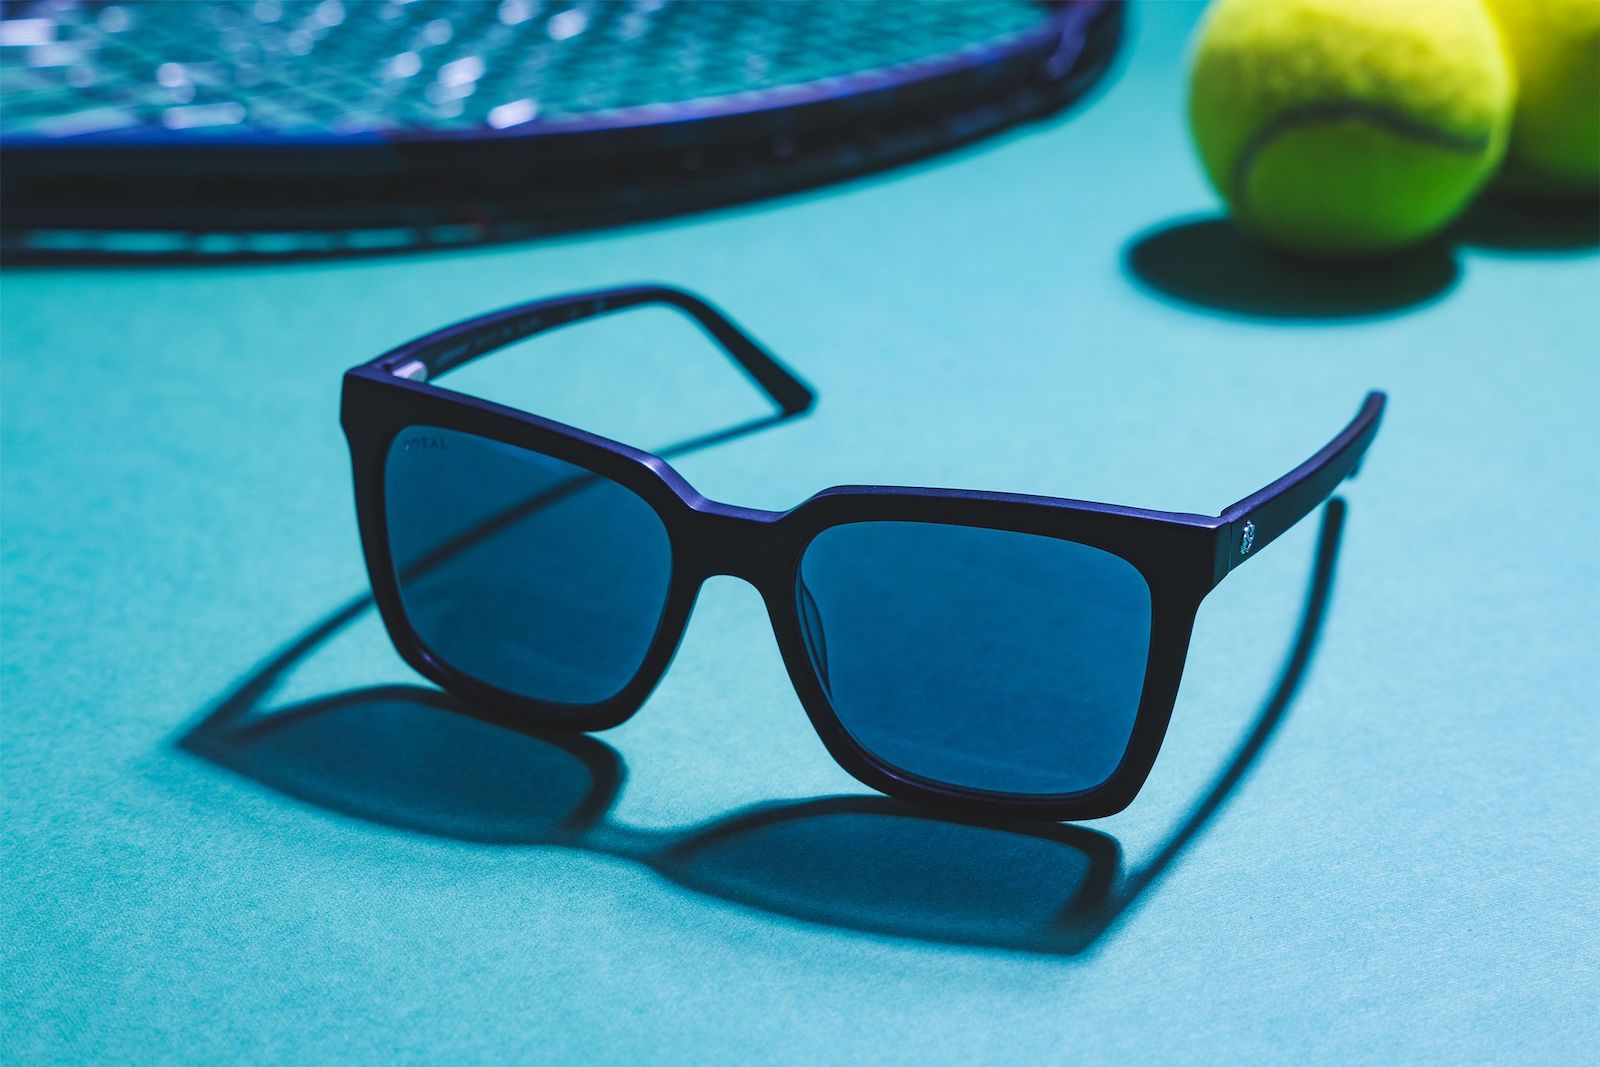 Coral Eyewear offers high performance products with a sustainability ethos.